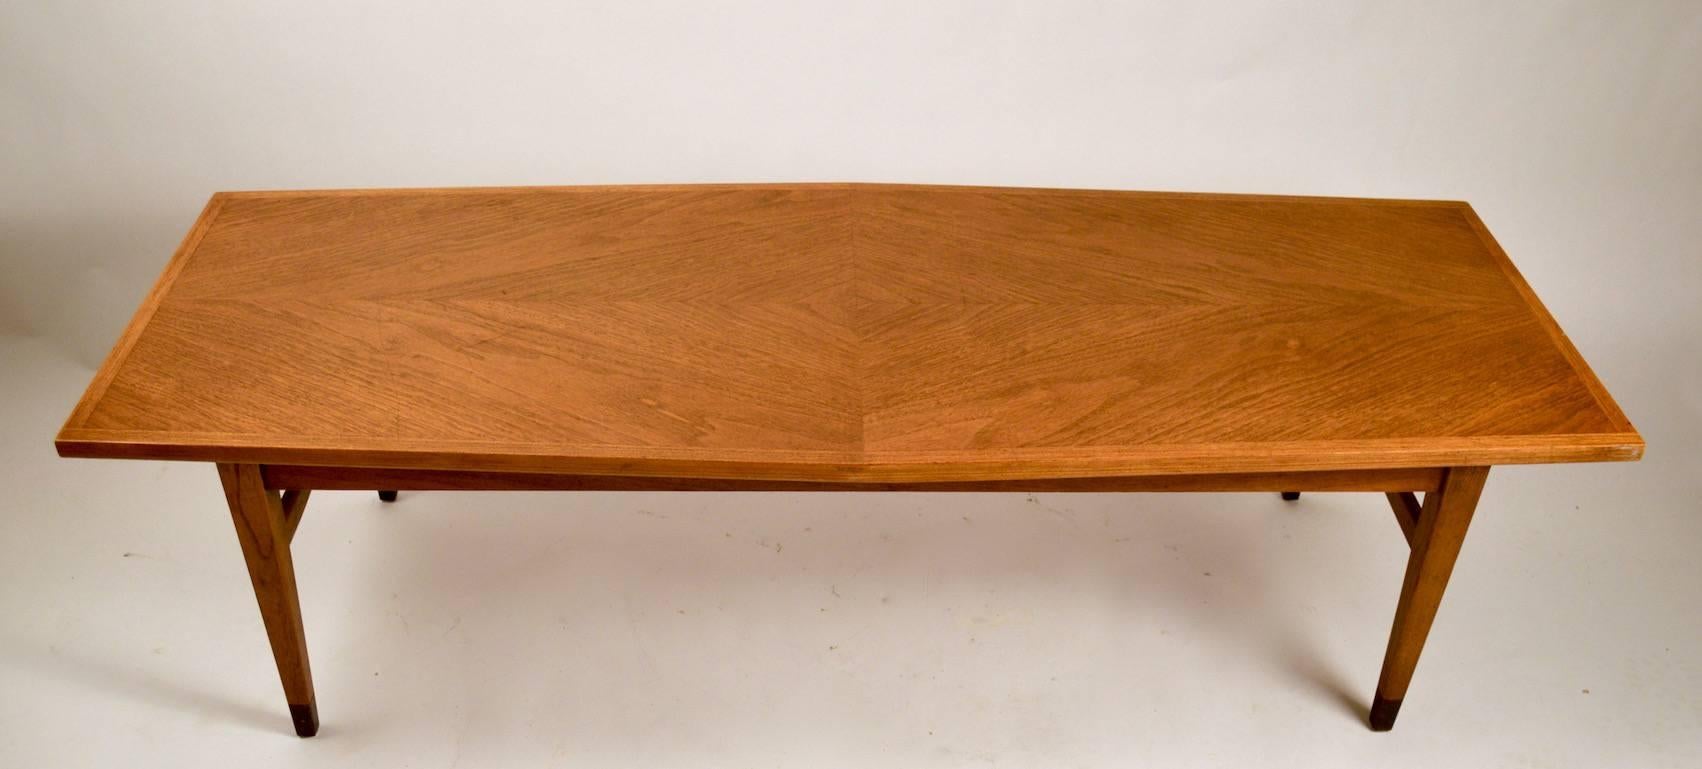 Classic Mid-Century coffee, cocktail table. Six side top, on tapering legs, architectural style and construction.